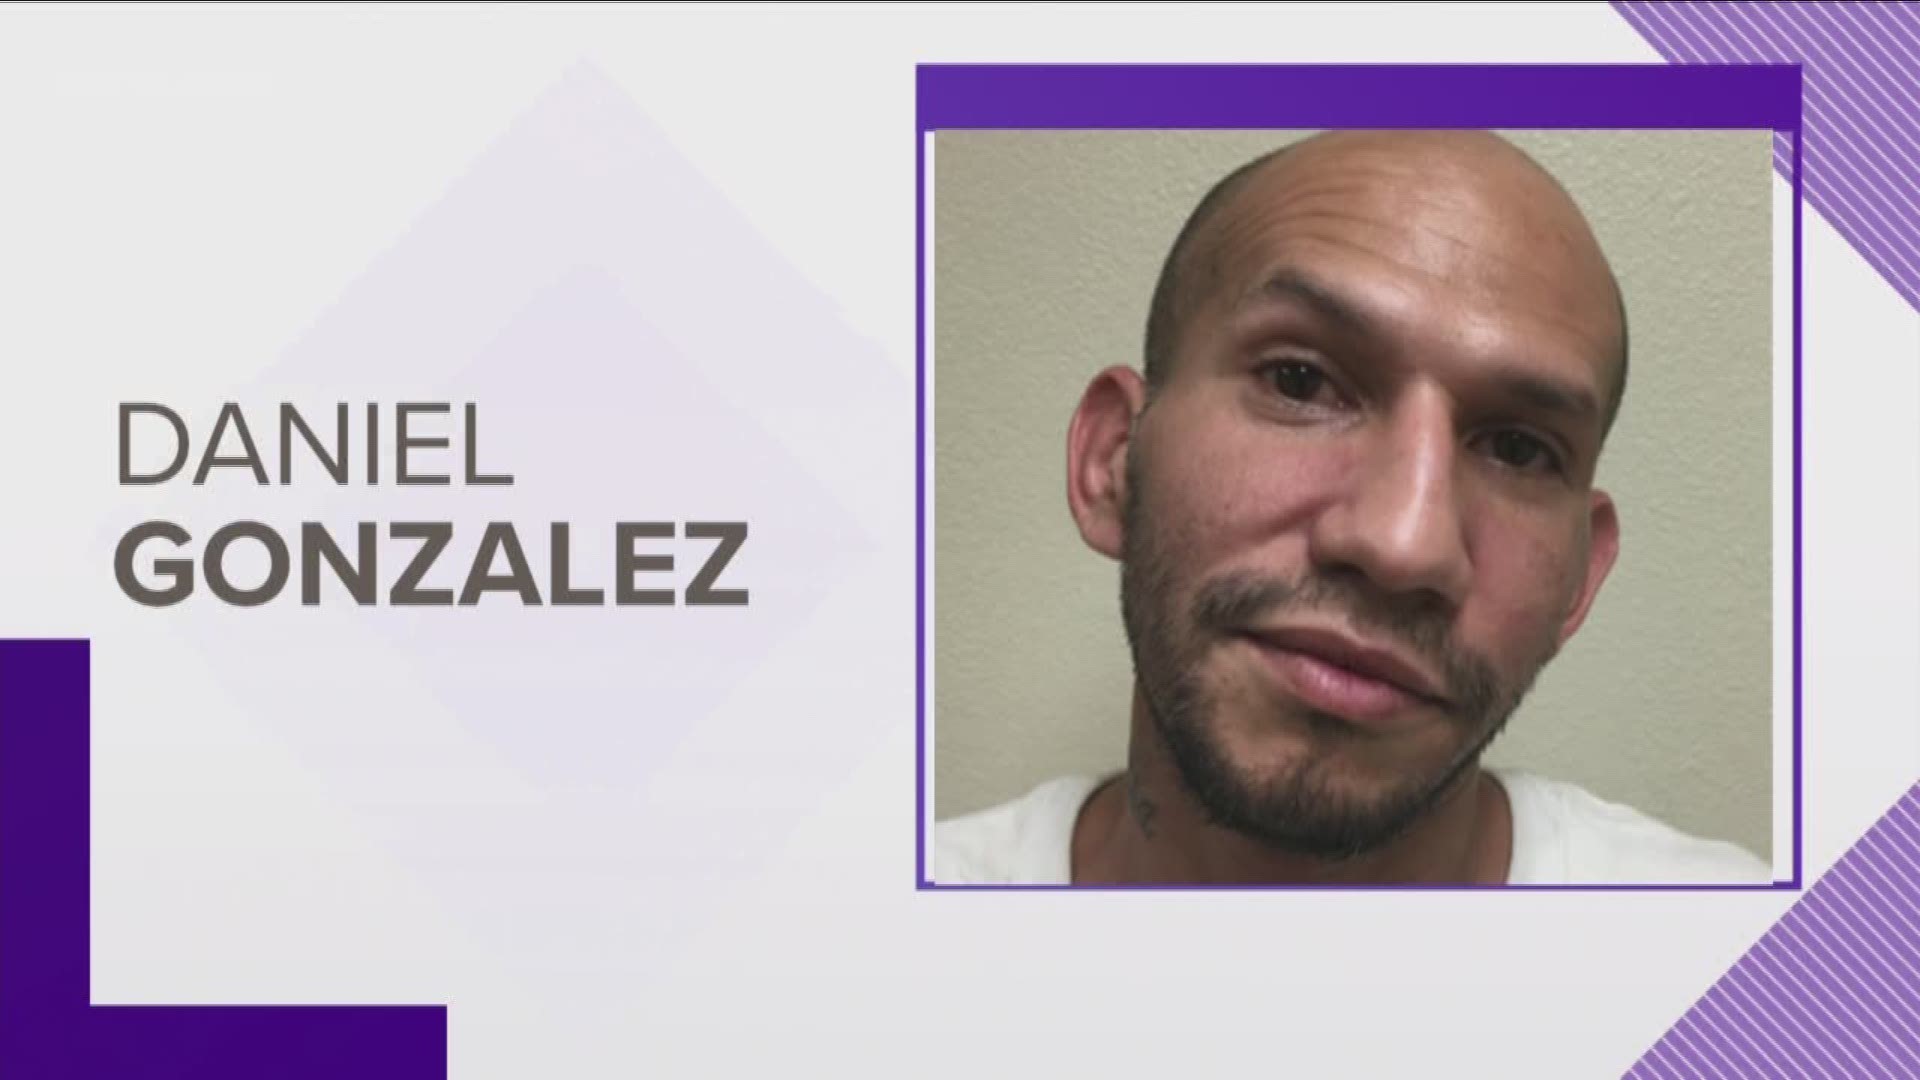 According to the Robstown Police Department, 33-year-old Daniel Gonzalez was apprehended after he was identified from surveillance video.